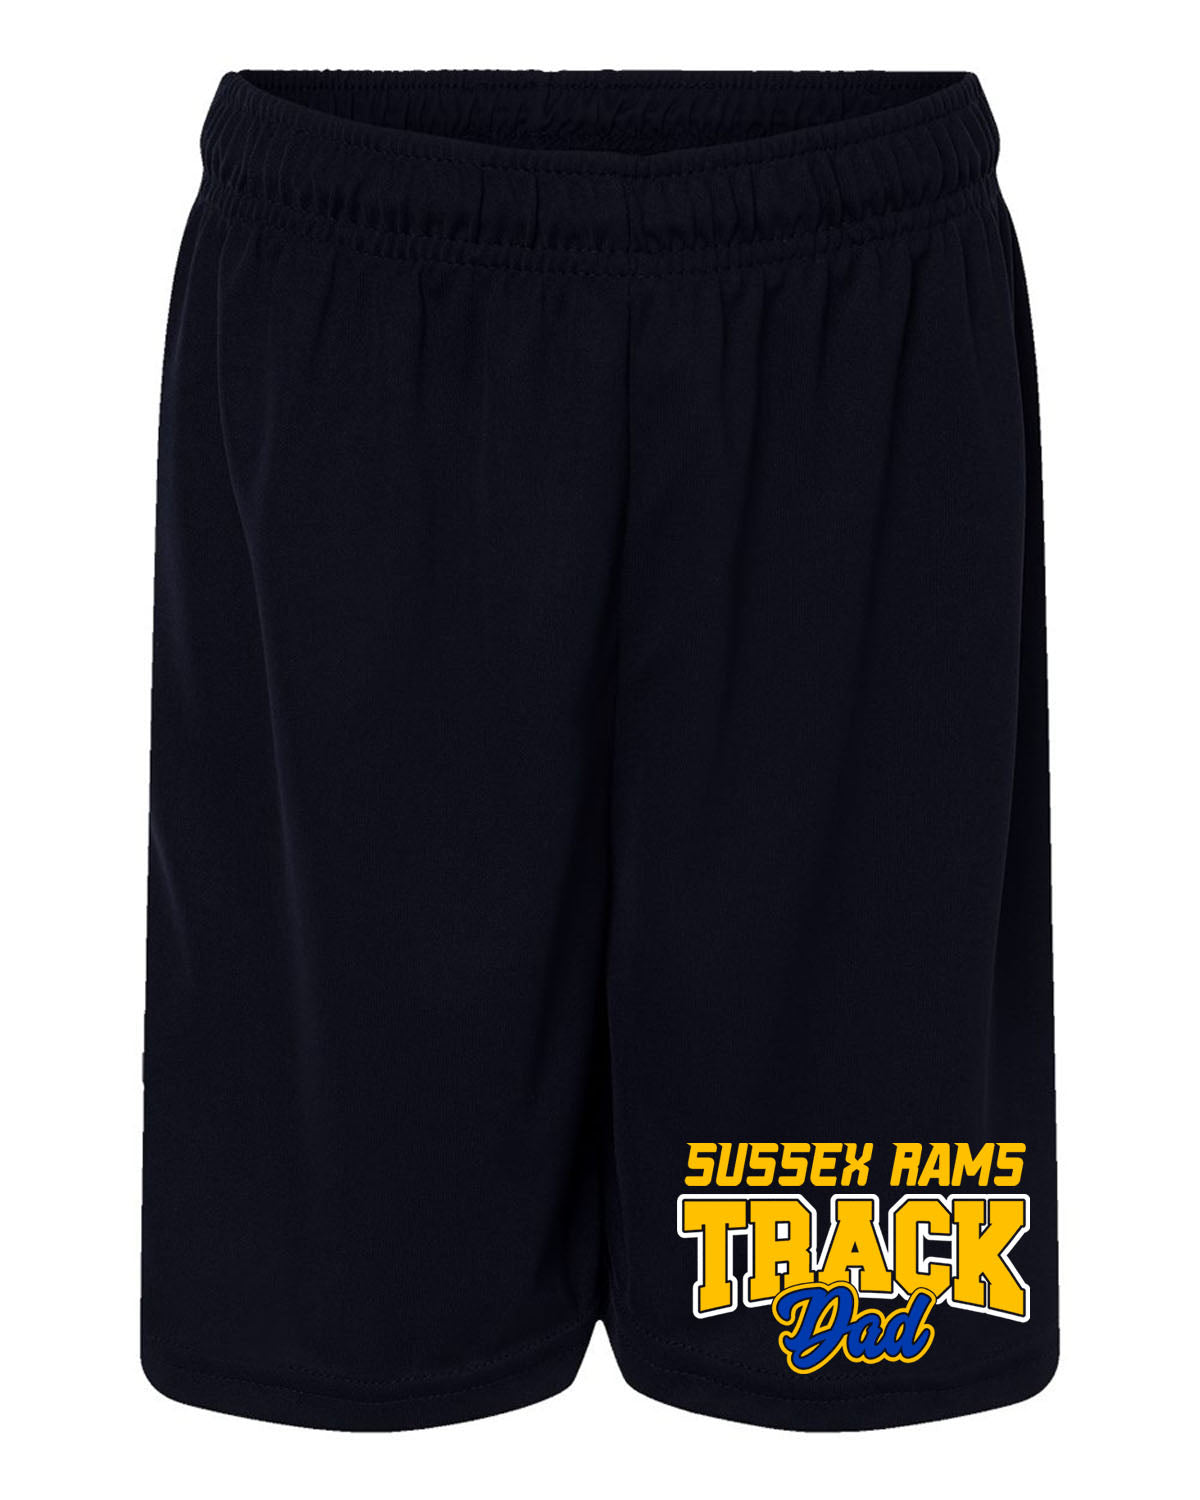 Sussex Rams Track Performance Shorts Design 1